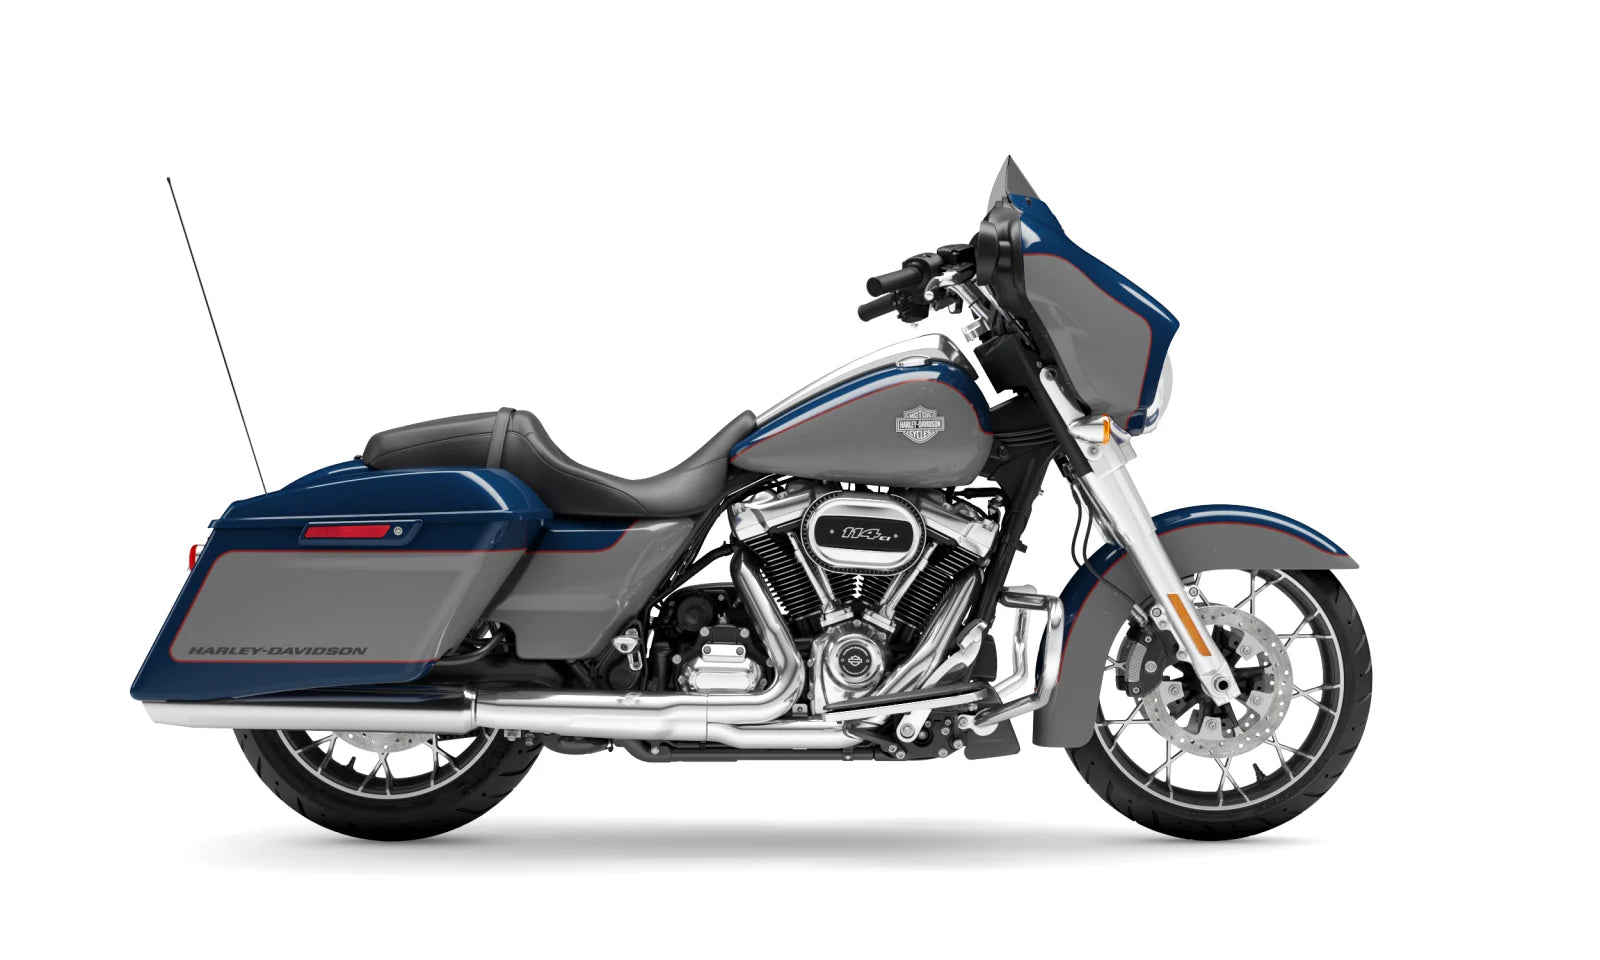 Street Glide Ample Storage Capacity for Extended Trips